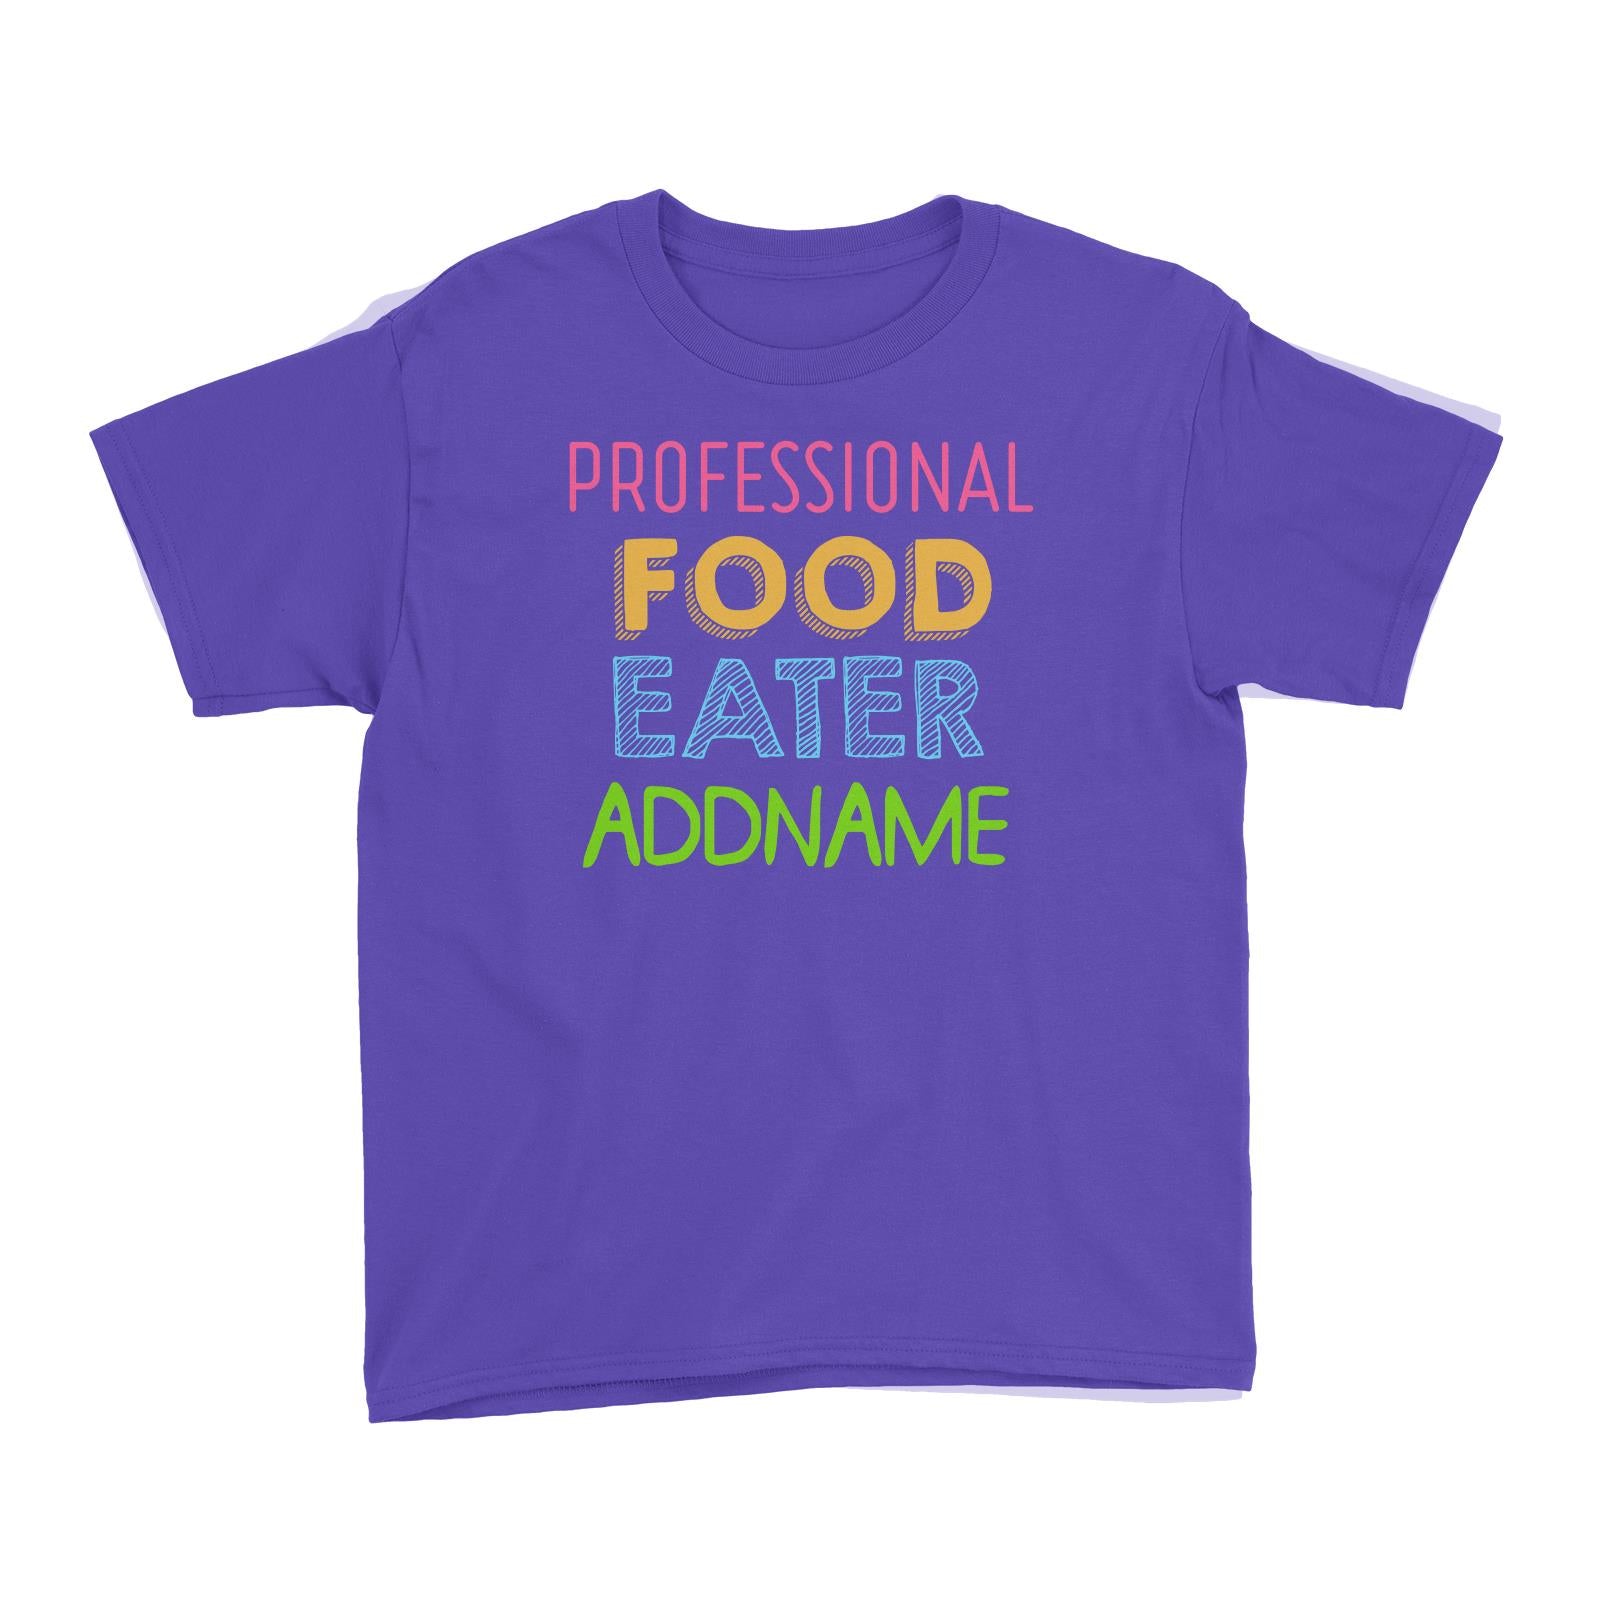 Professional Food Eater Addname Kid's T-Shirt